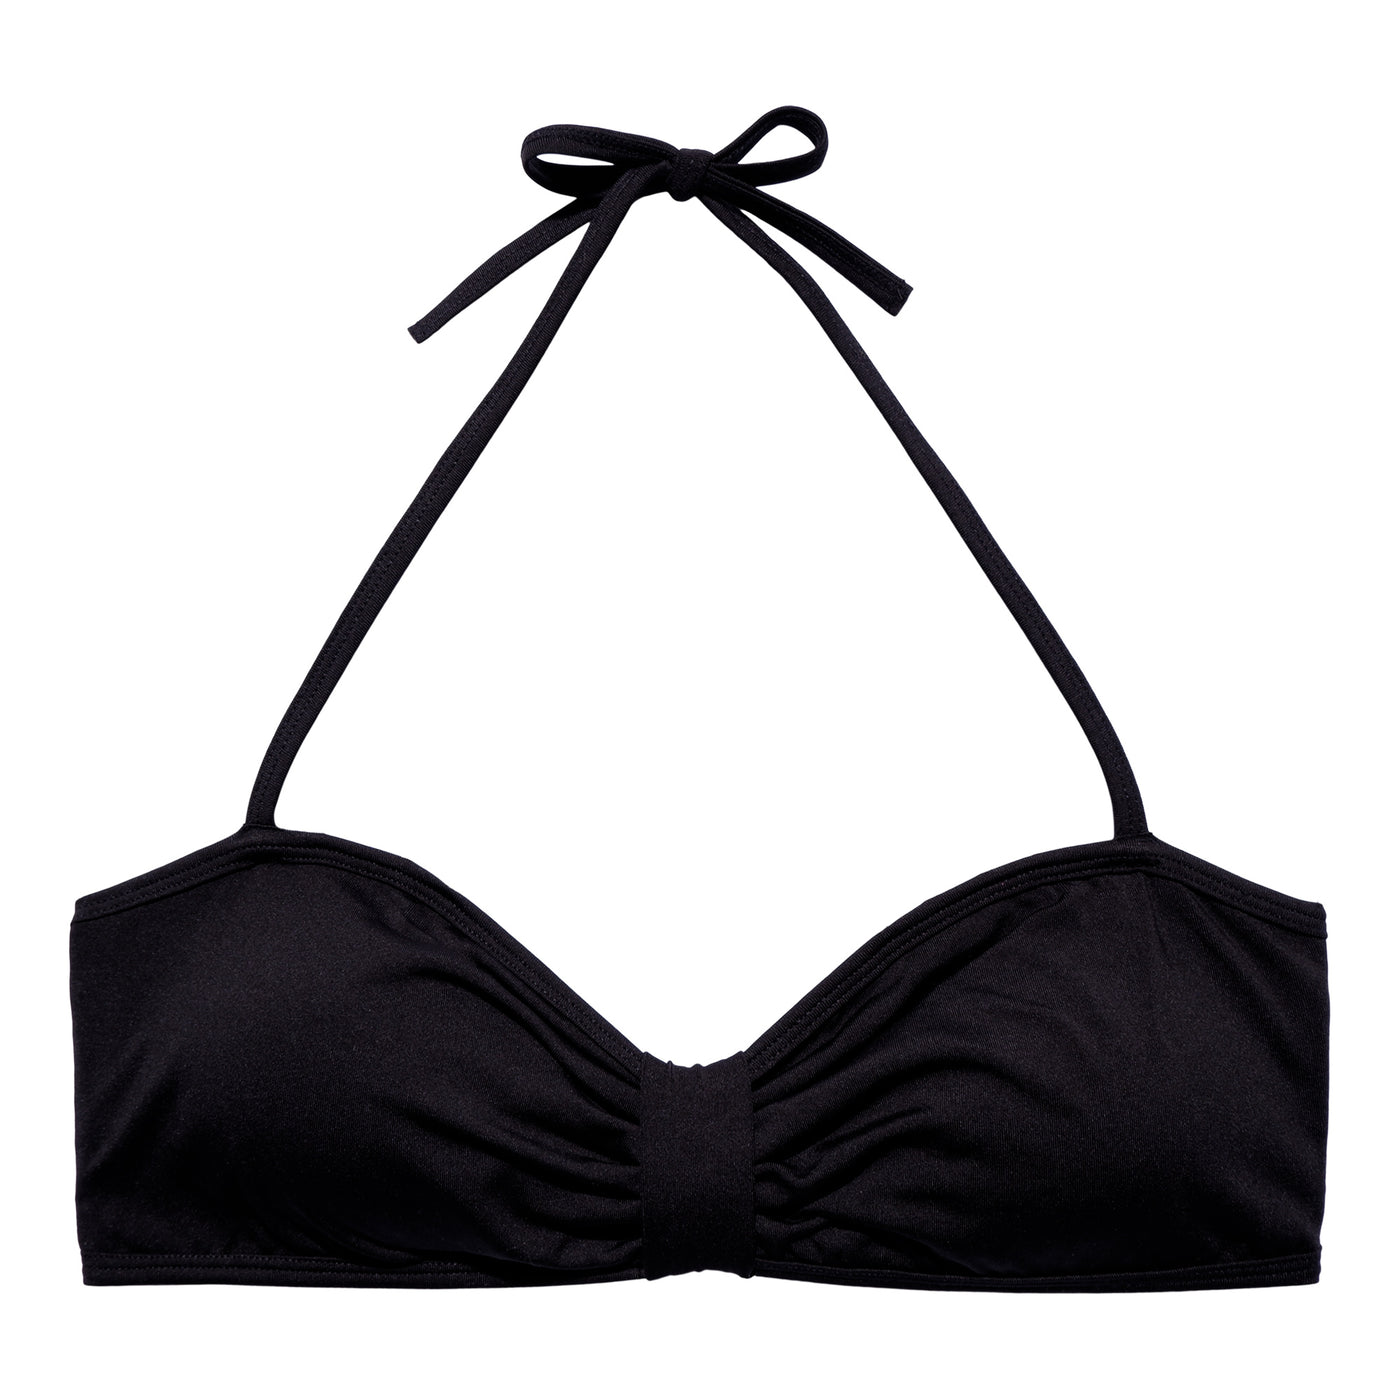 Our Melina Bikini Bandeau is made in soft recycled polyester fabric in classic black. Sustainable swimwear.